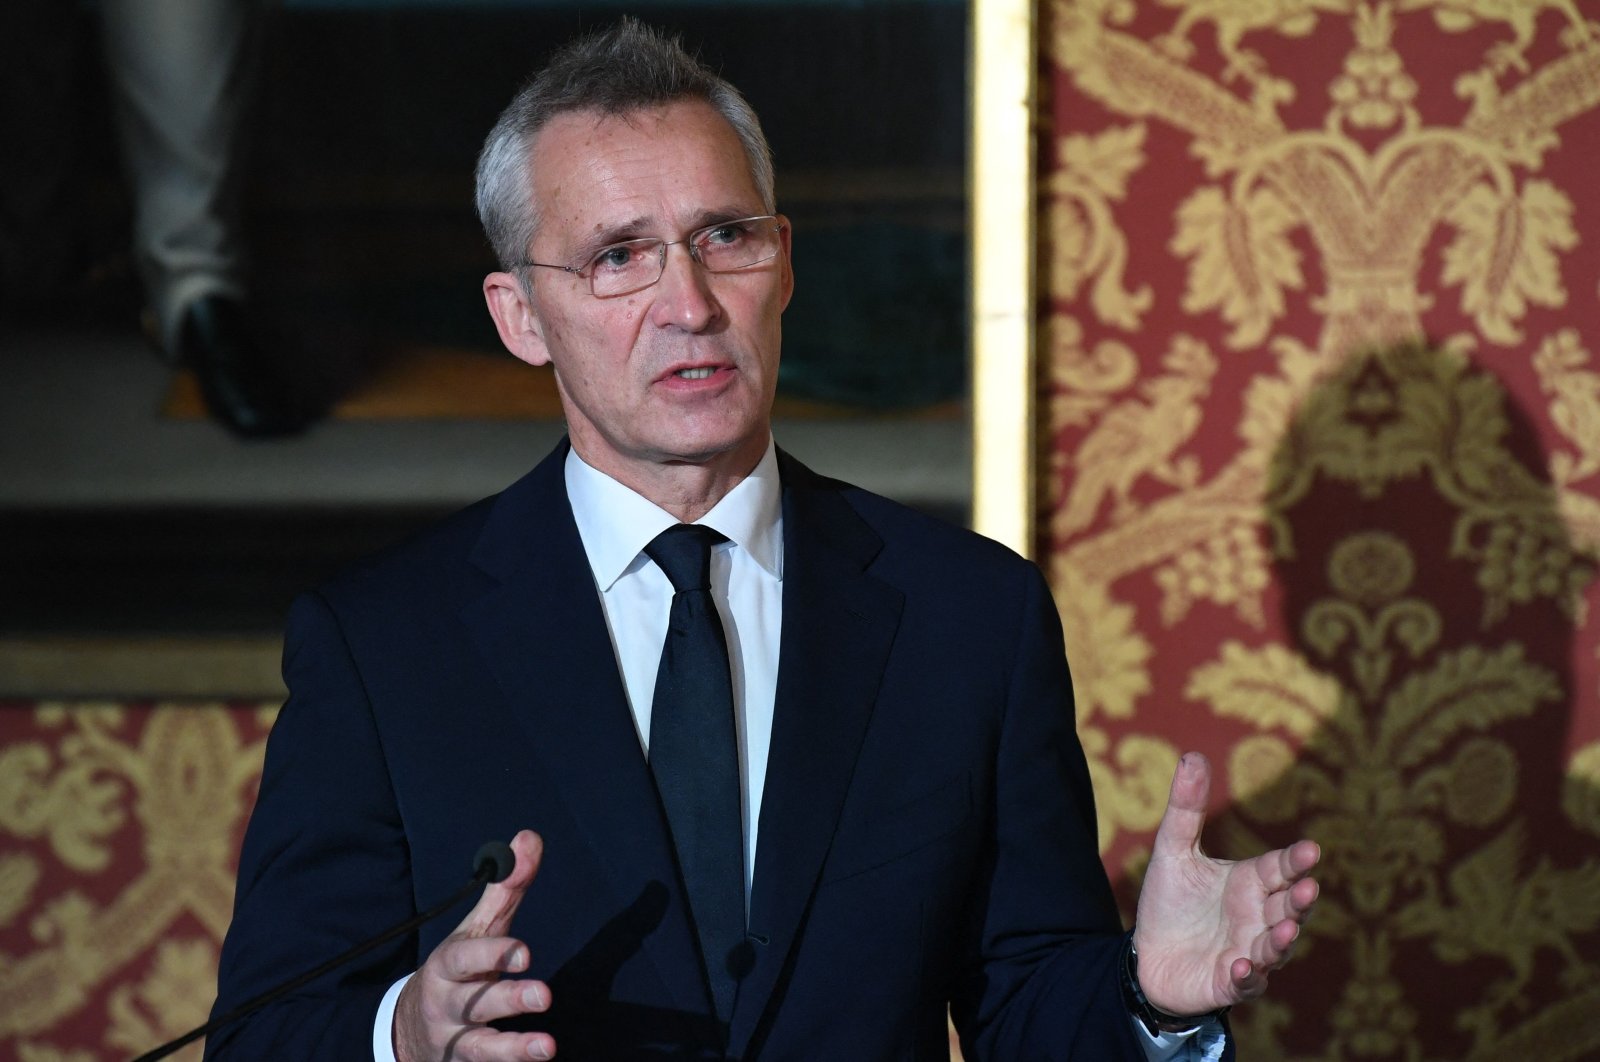 NATO Secretary-General Jens Stoltenberg speaks during a press conference with the French Foreign Affairs Minister and French Defense Minister after their meeting in Paris, Dec. 10, 2021. (AFP Photo)